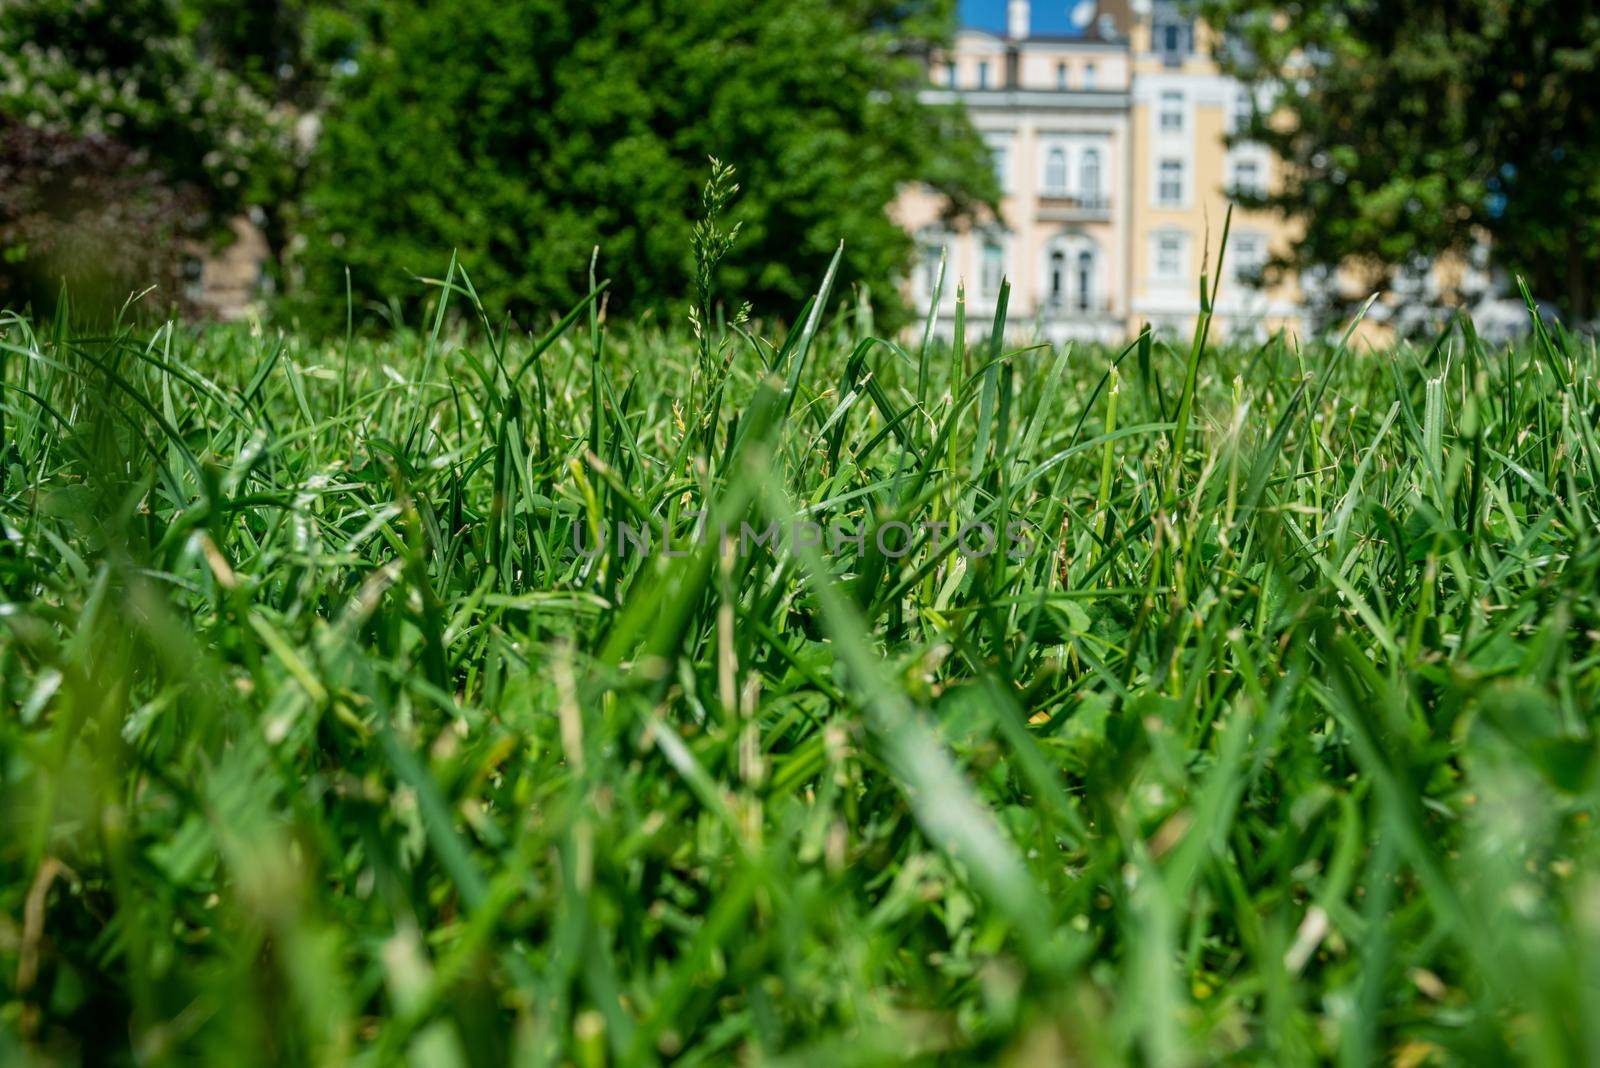 Close-up of green grass on spring or summer day in urban surroundings.